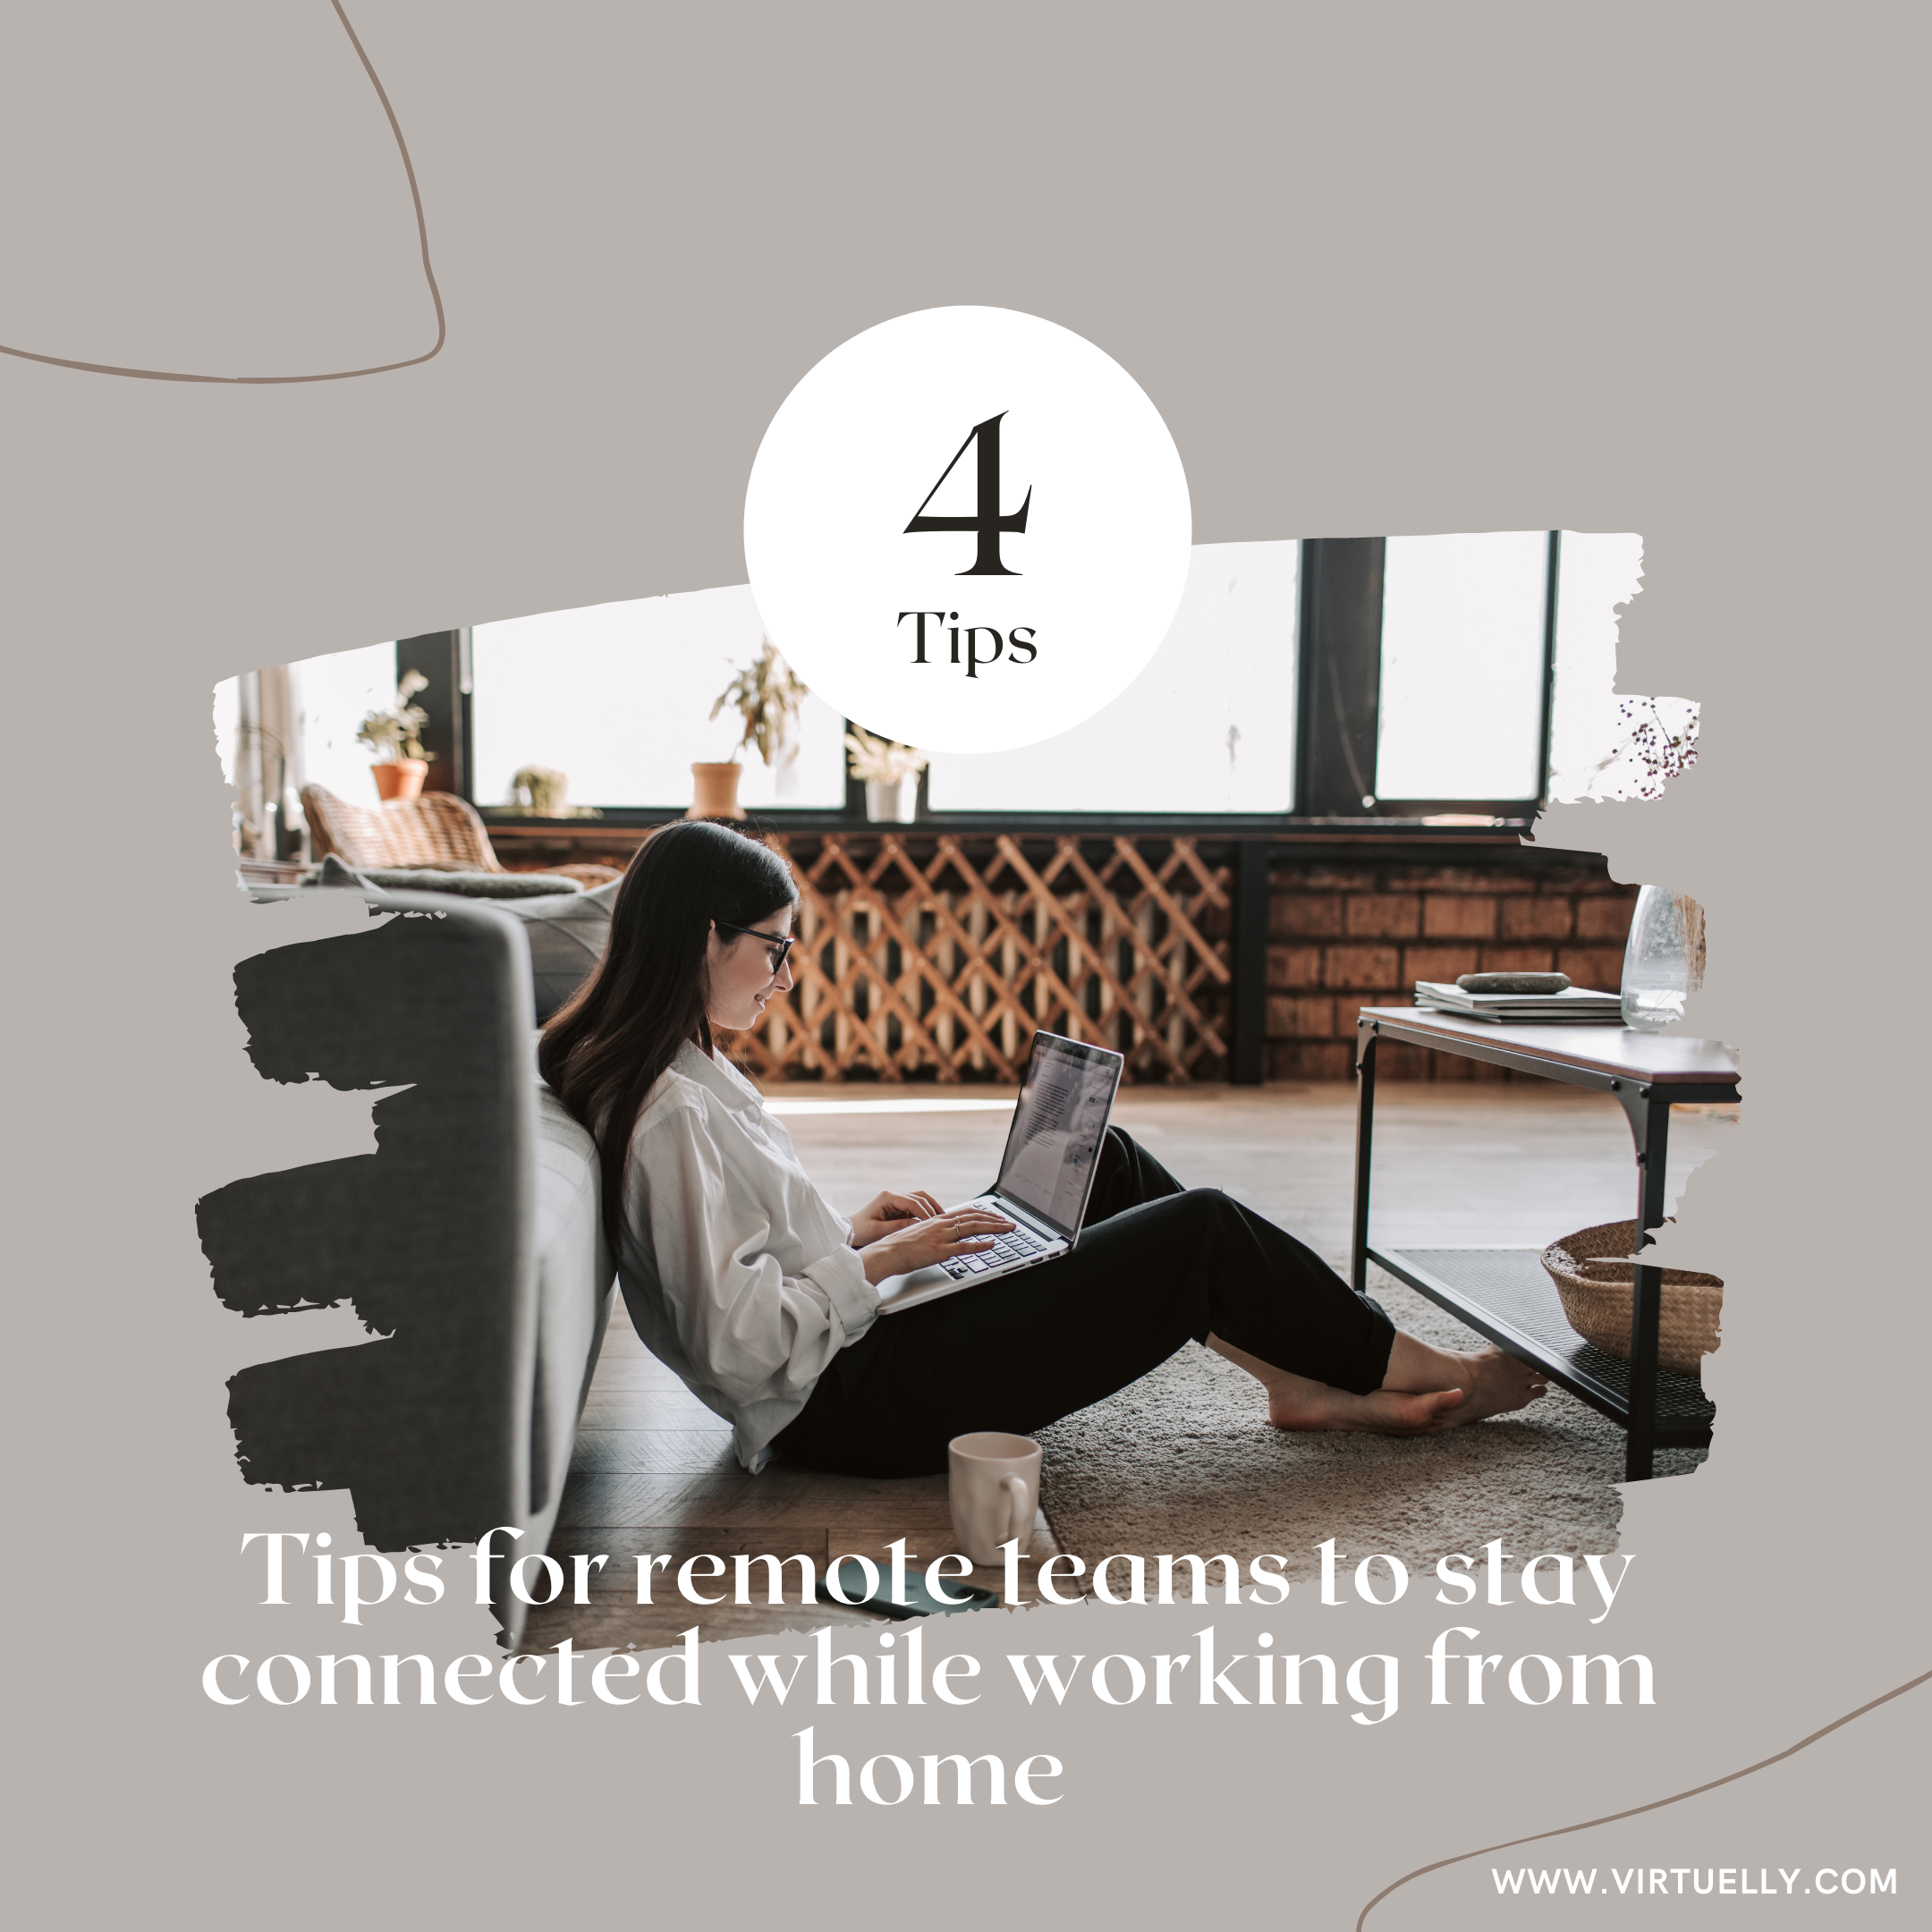 4 tips for remote teams to stay connected with eachother